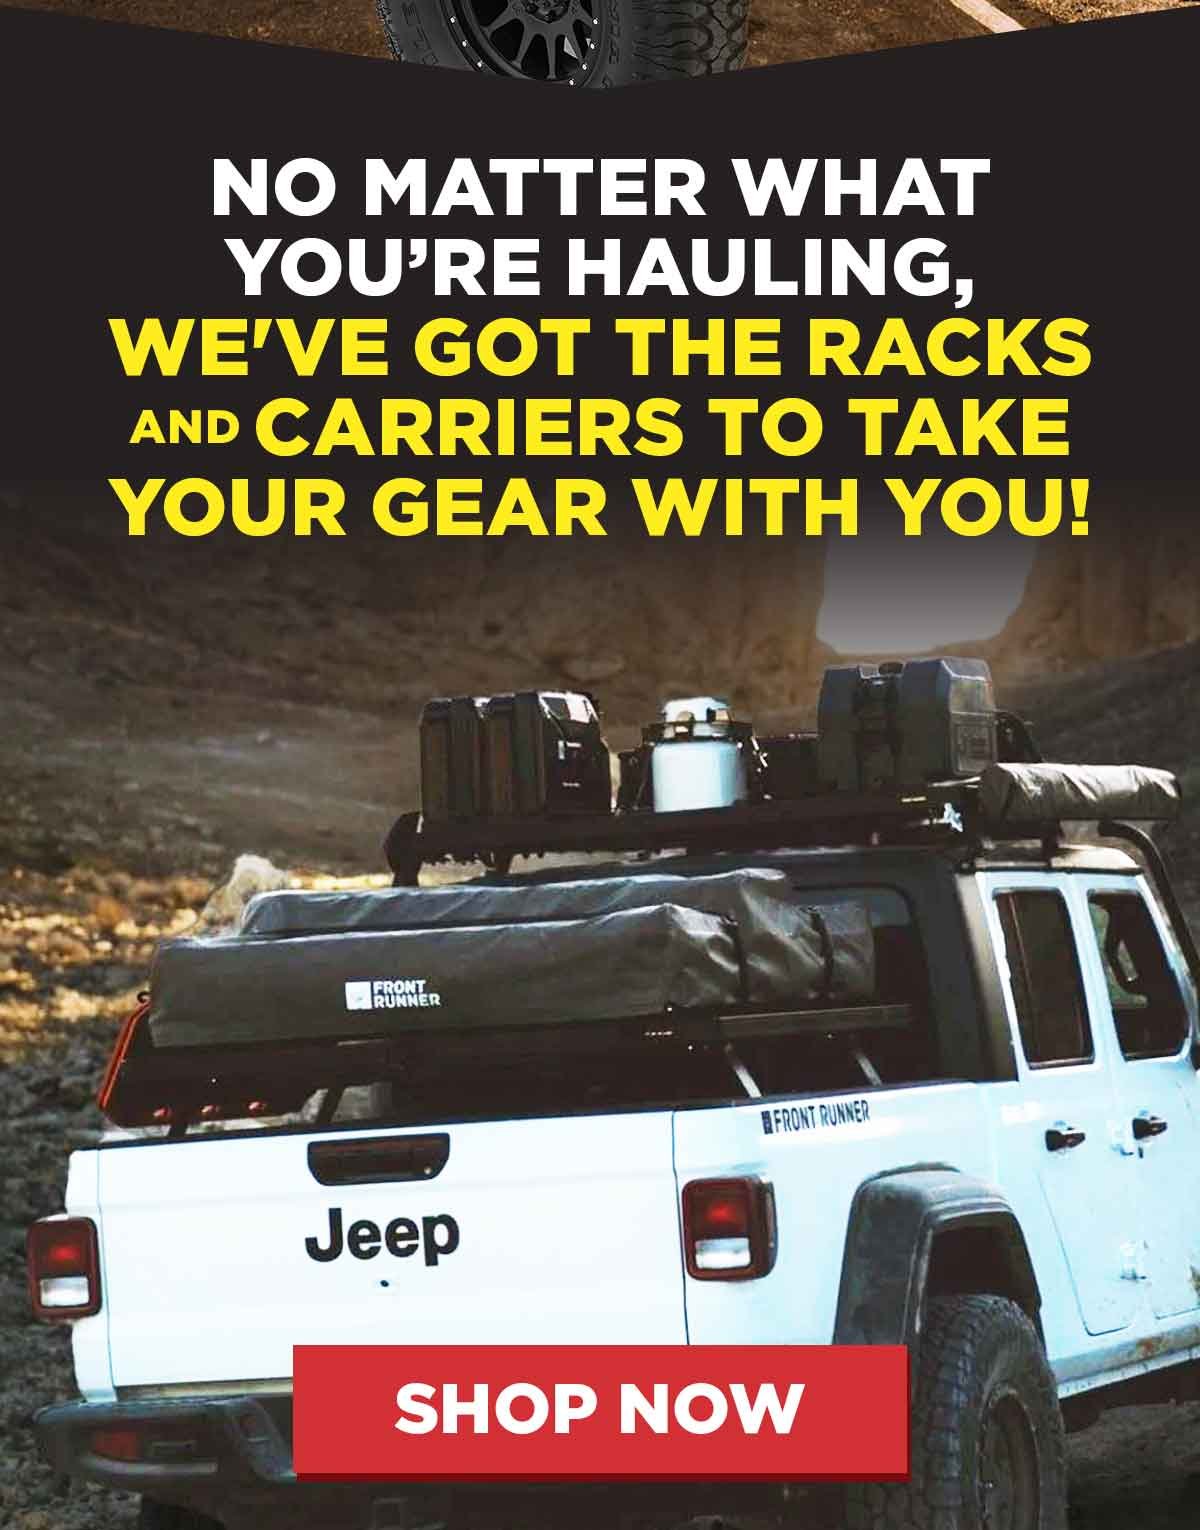 No matter what you’re hauling, we've got the racks and carriers to take your gear with you!